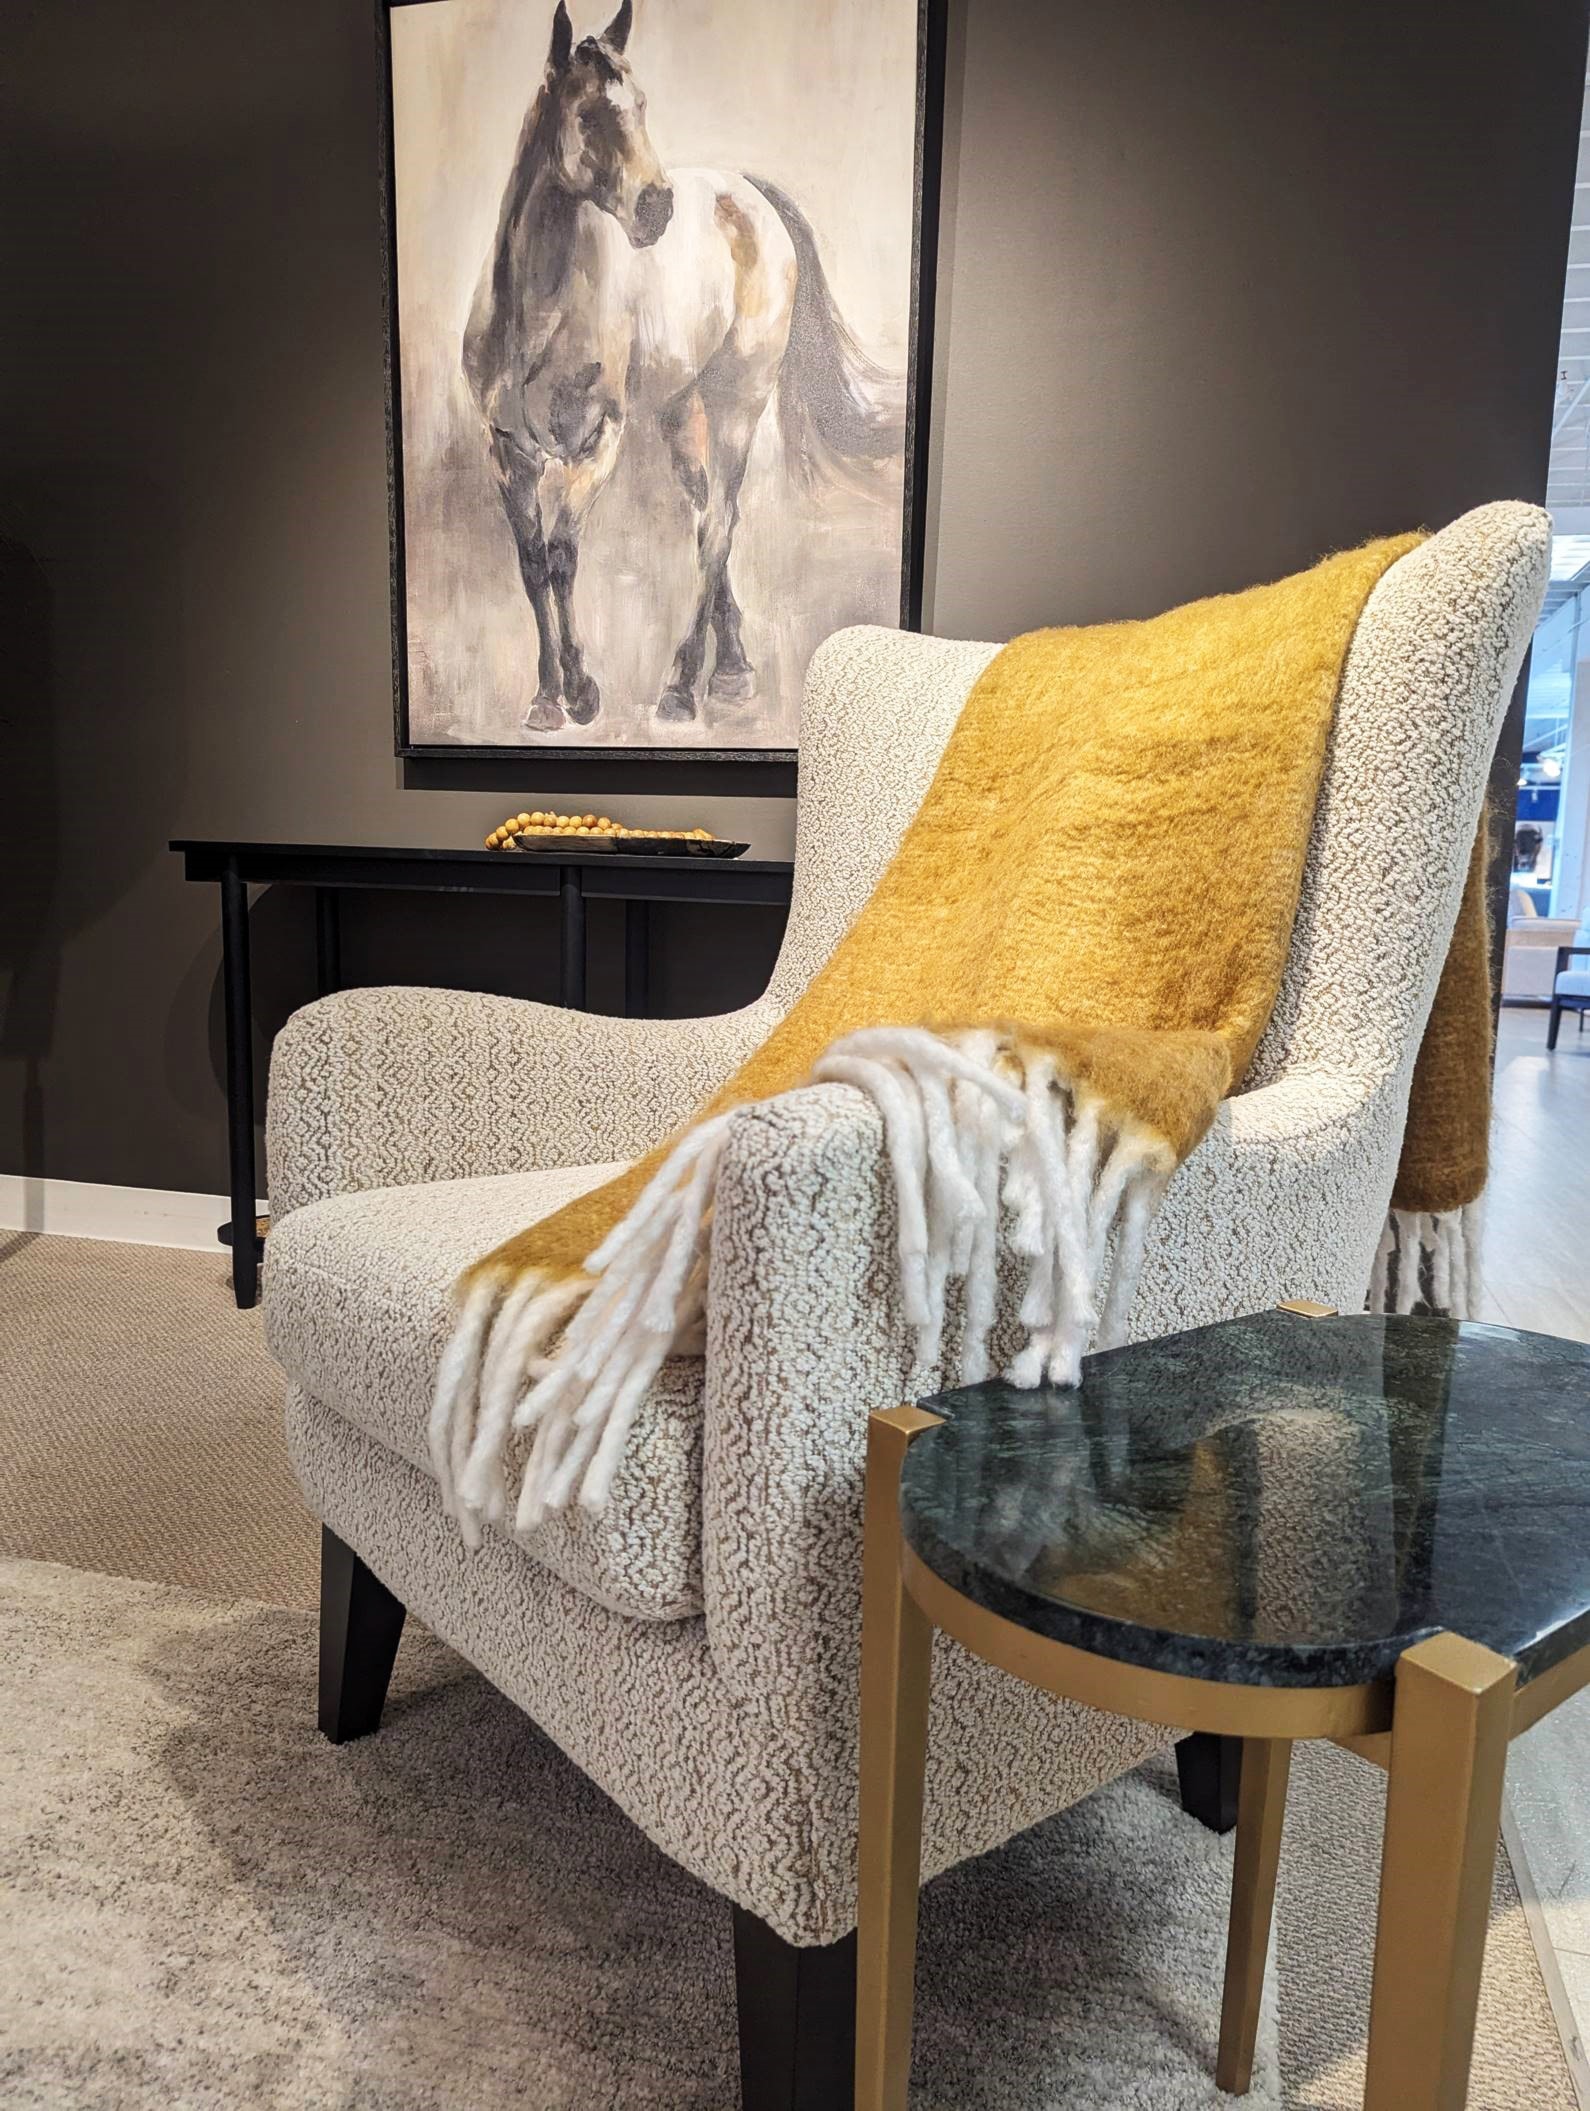 Accent Chair with Yellow Throw Blanket and Wall Art with Horse on it behind